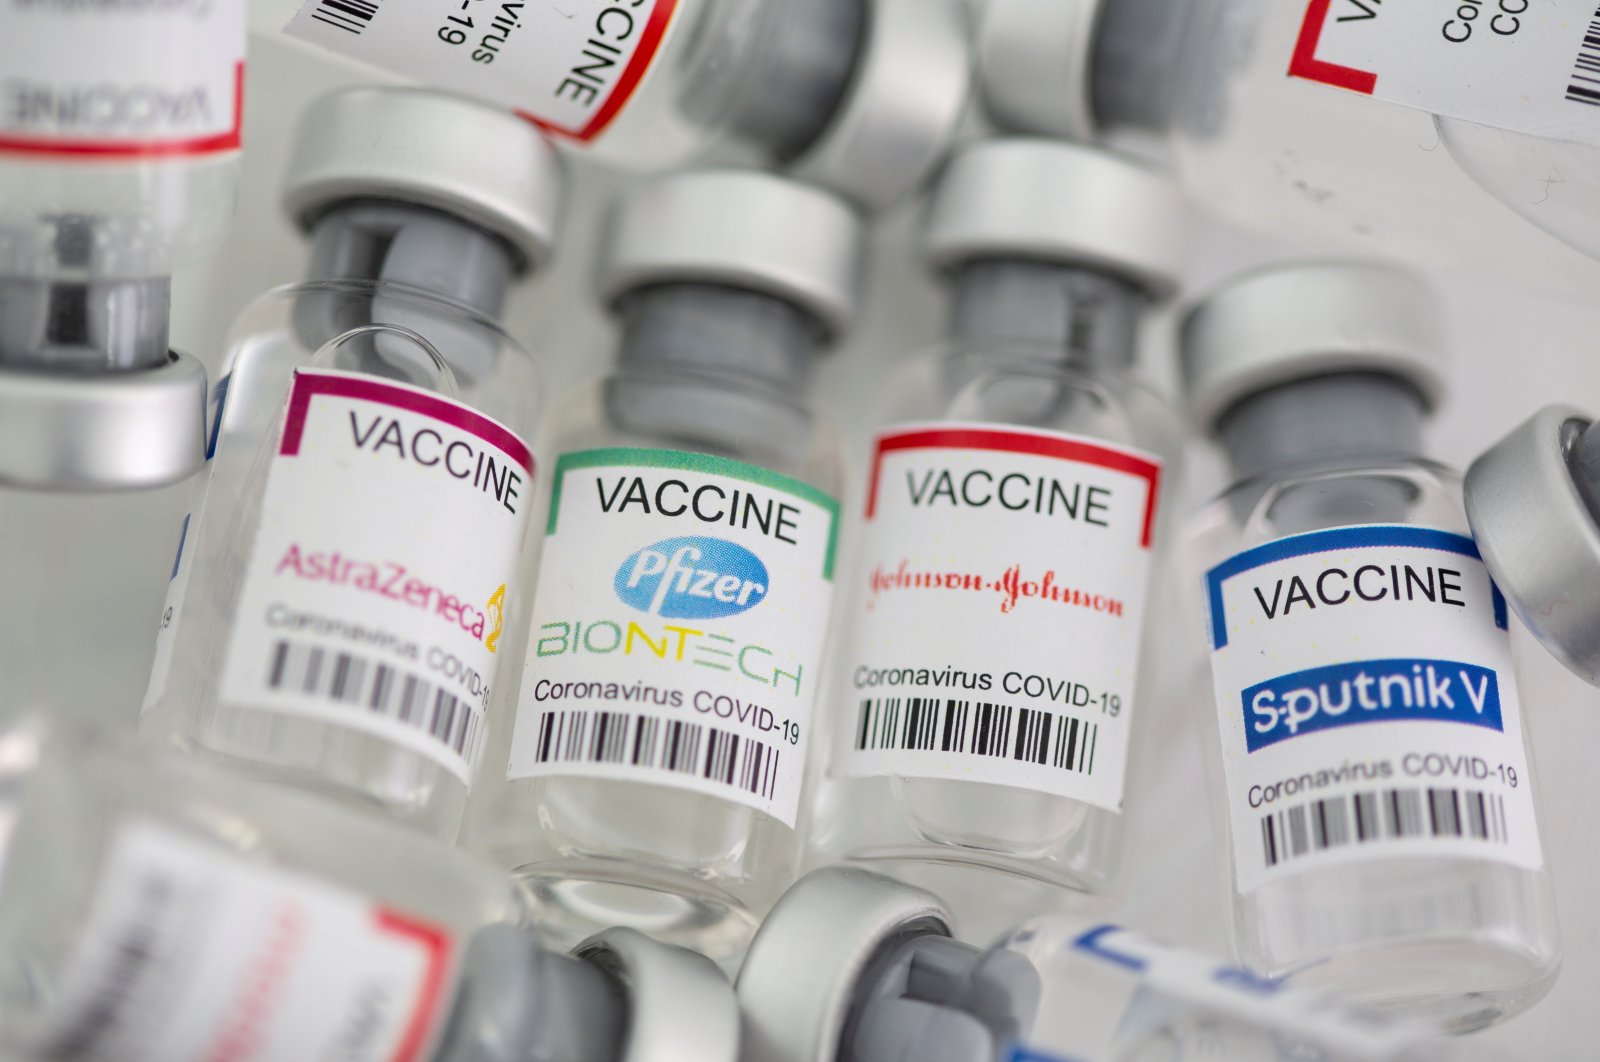 Vials of COVID-19 vaccines labeled AstraZeneca, Pfizer-BioNTech, Johnson & Johnson and Sputnik V are seen in this illustration picture taken on May 2, 2021. (Reuters Photo)